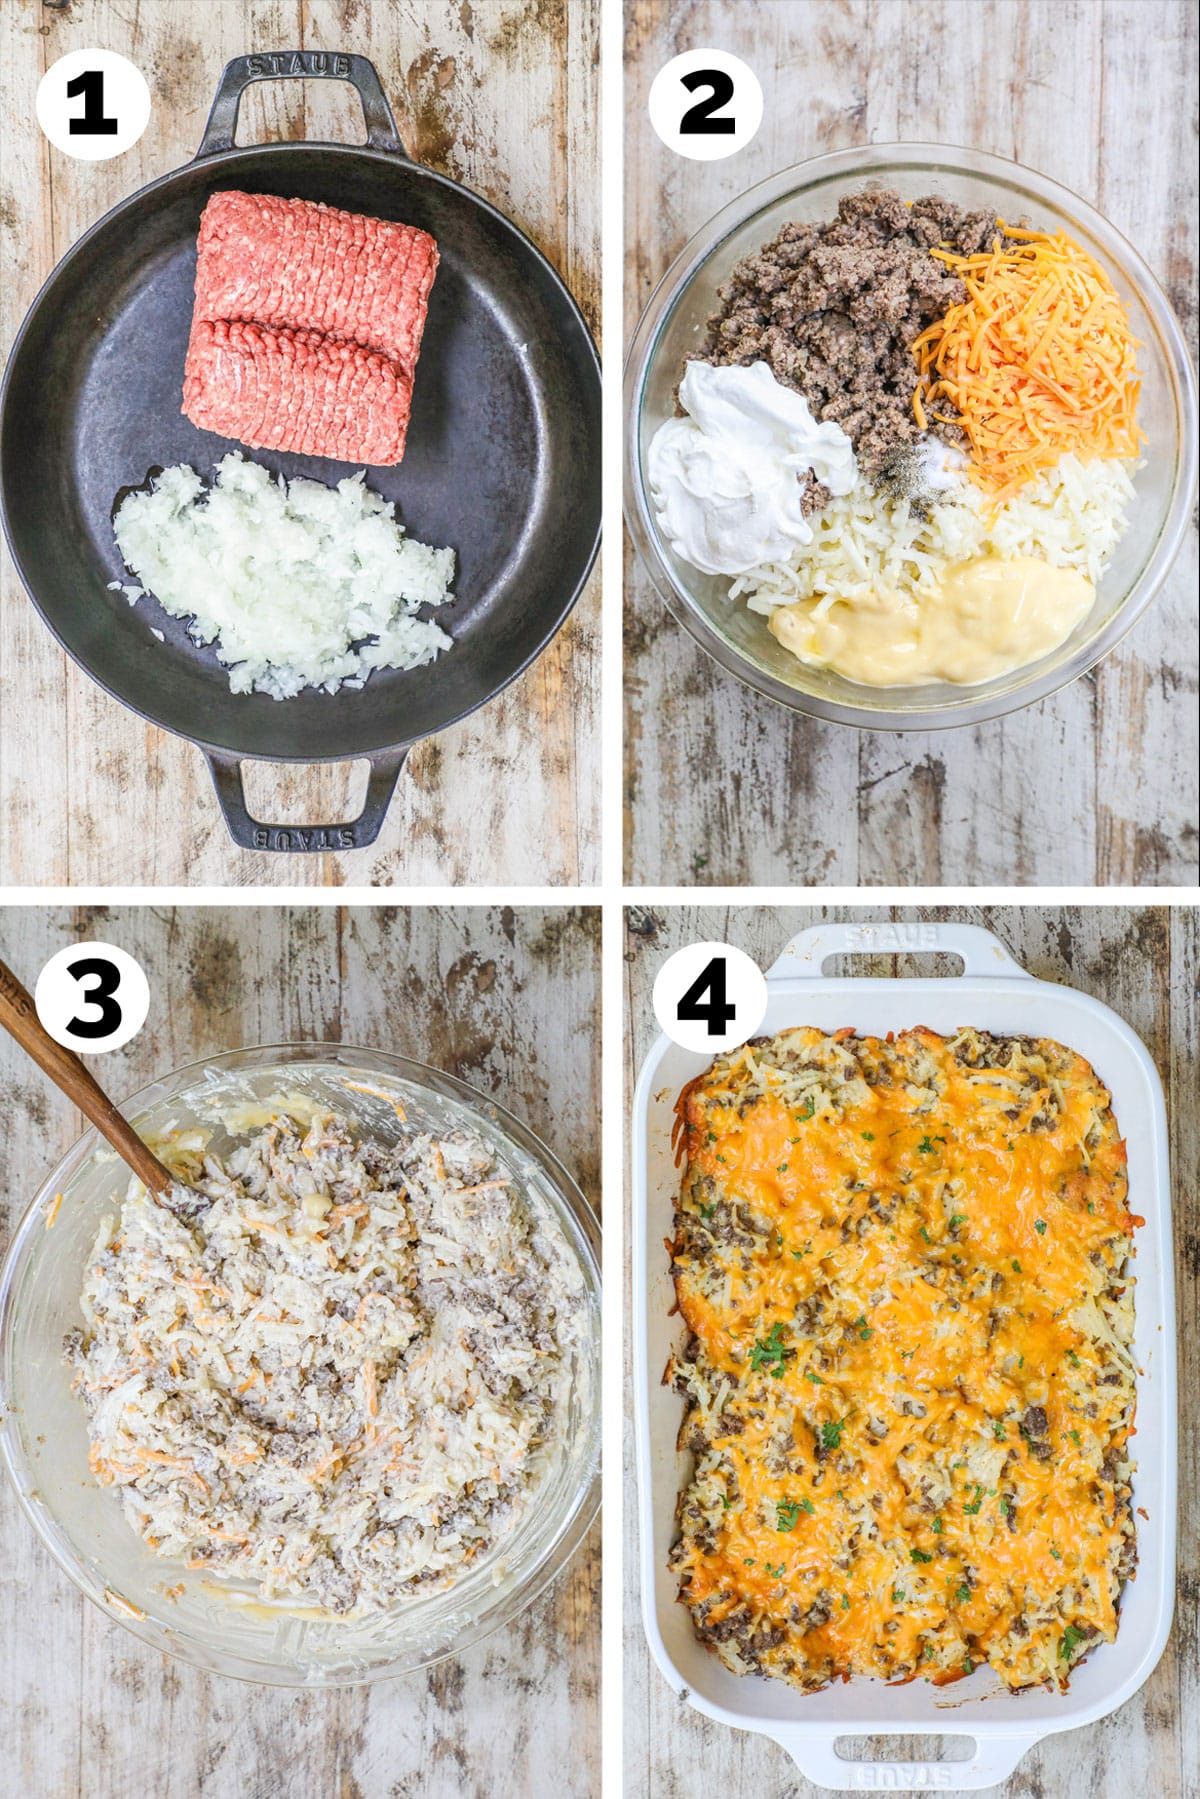 How to make ground beef hashbrown casserole: 1) brown the beef and onion, 2) add the ingredients to mixing bowl, 3) stir to combine, 4) bake in casserole dish with cheese on top